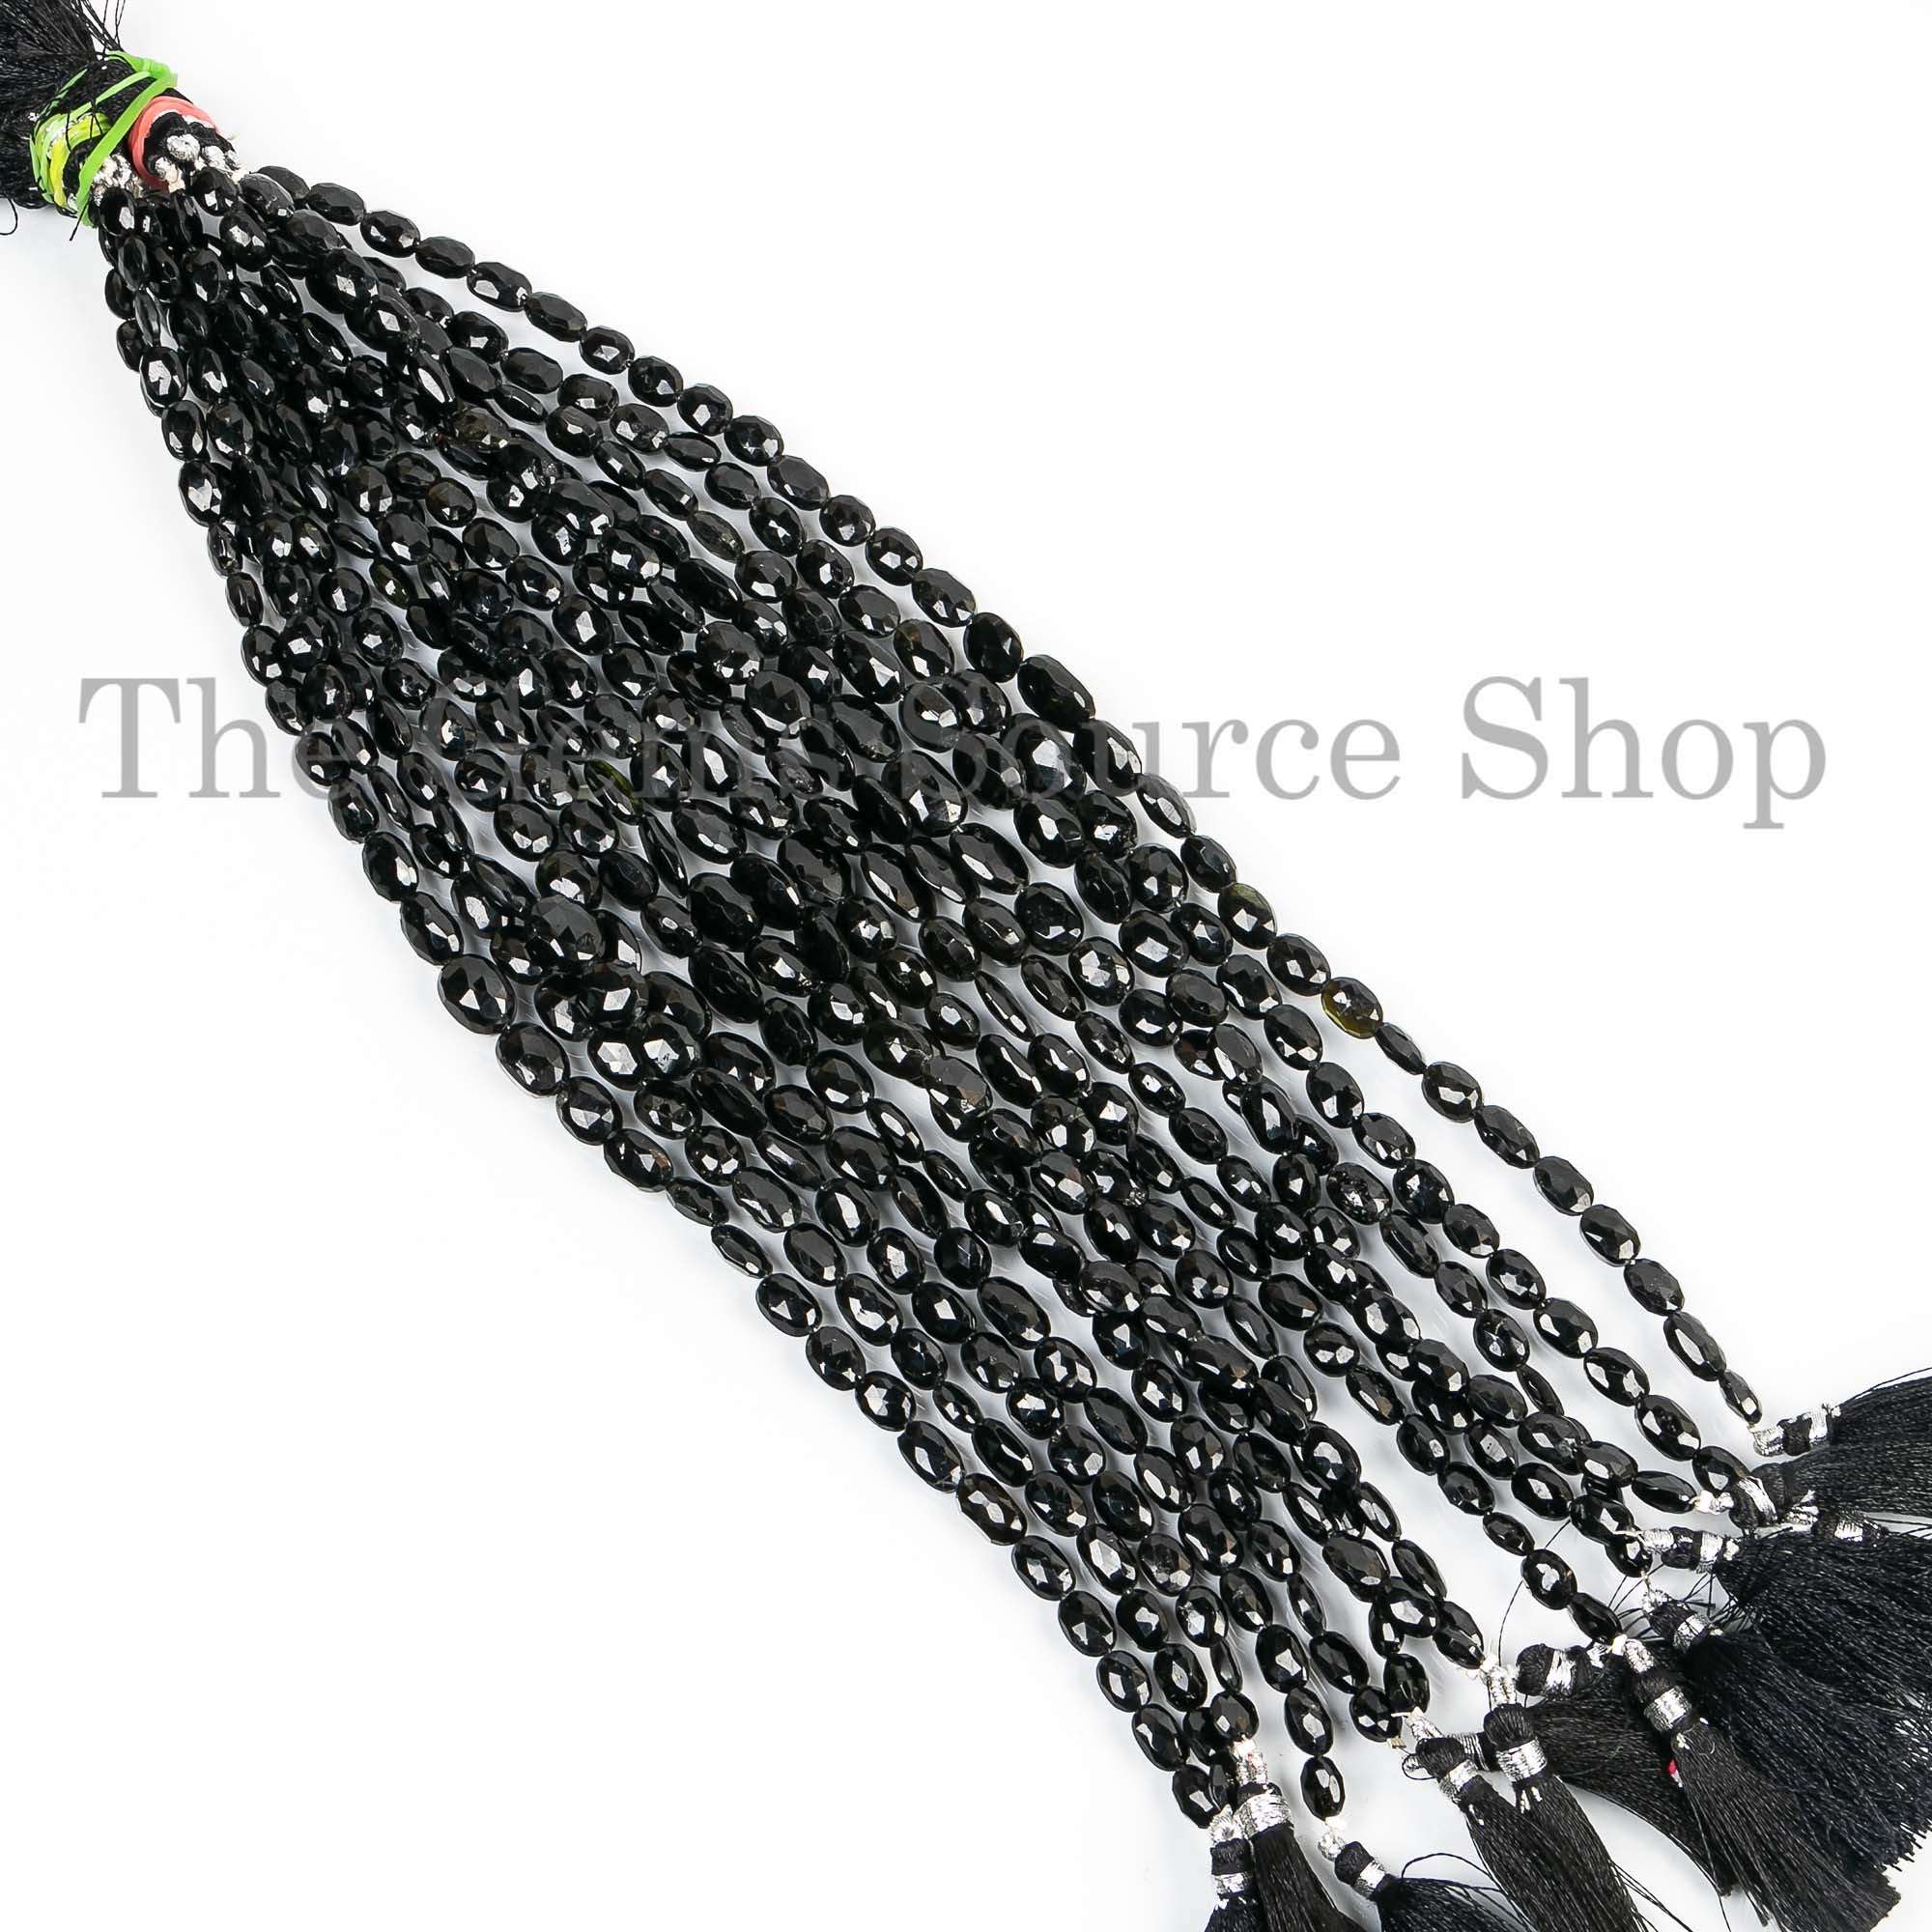 Black Tourmaline Oval Beads, Tourmaline Faceted Oval Beads, Tourmaline Briolette Beads, Straight Drill Oval Beads, Faceted Oval Beads